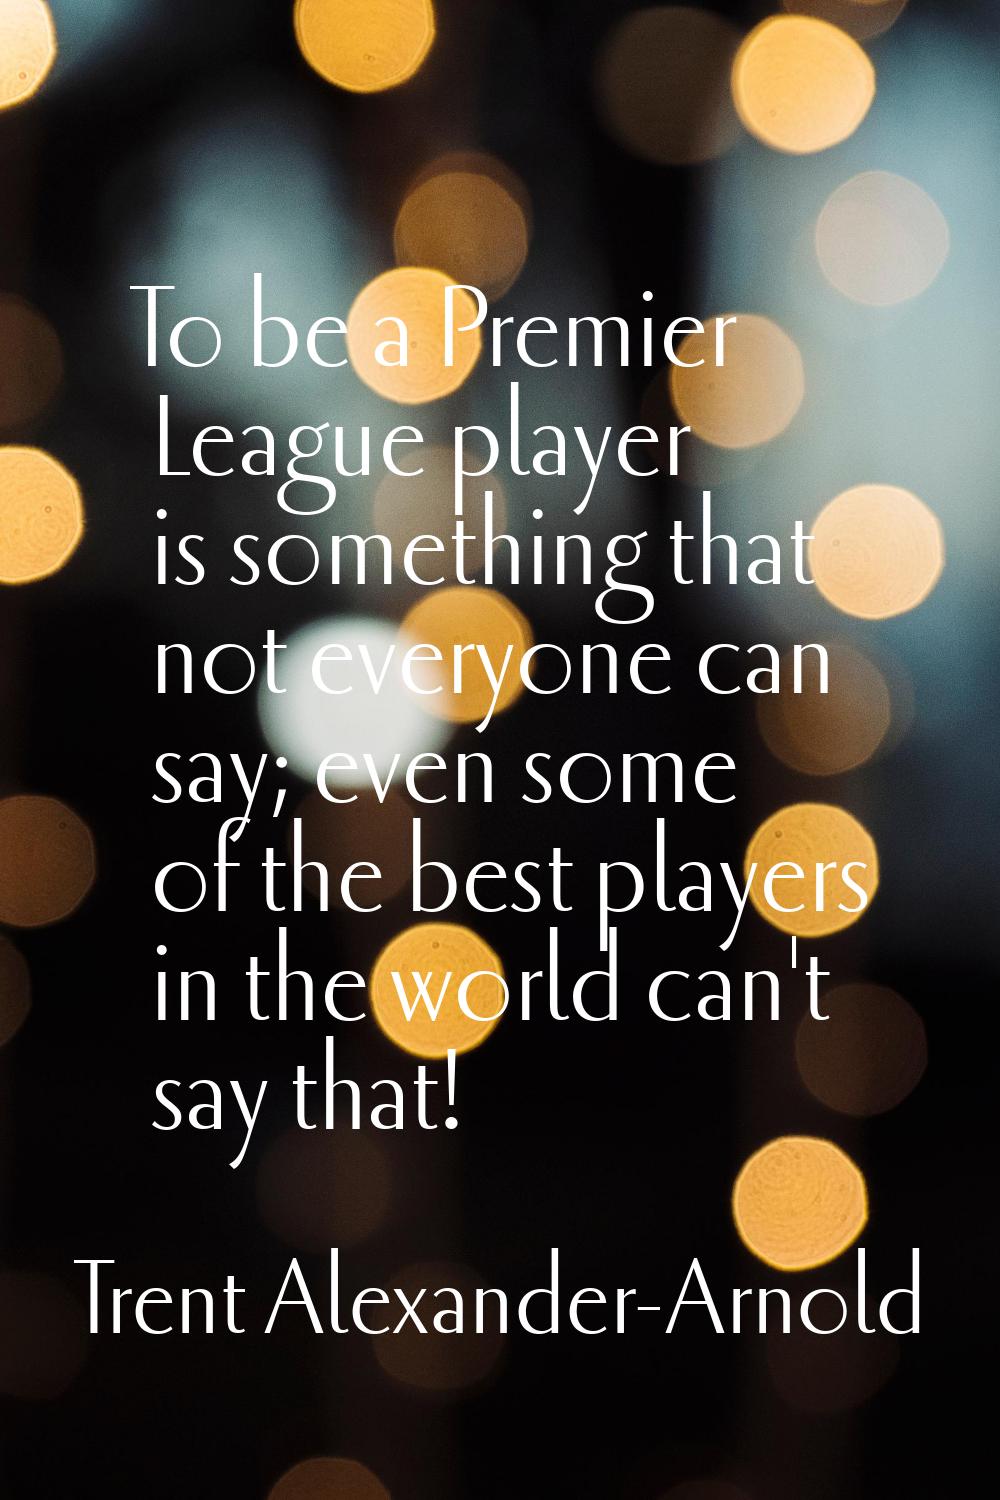 To be a Premier League player is something that not everyone can say; even some of the best players